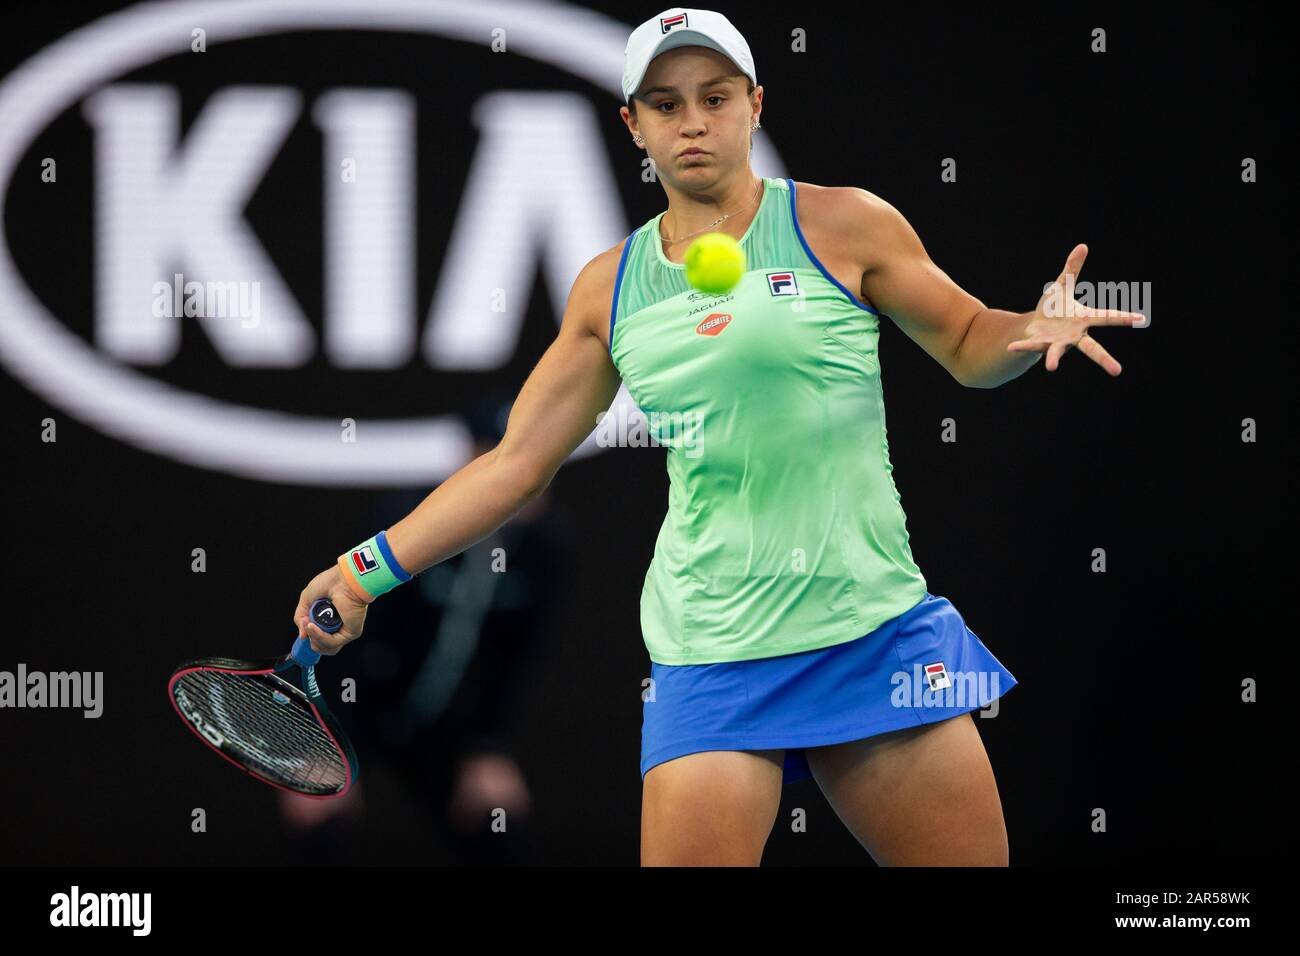 Melbourne, Australia. 26 January, 2020. Ashleigh Barty during The Australian Open. Credit: Dave Hewison/Alamy Live News Stock Photo